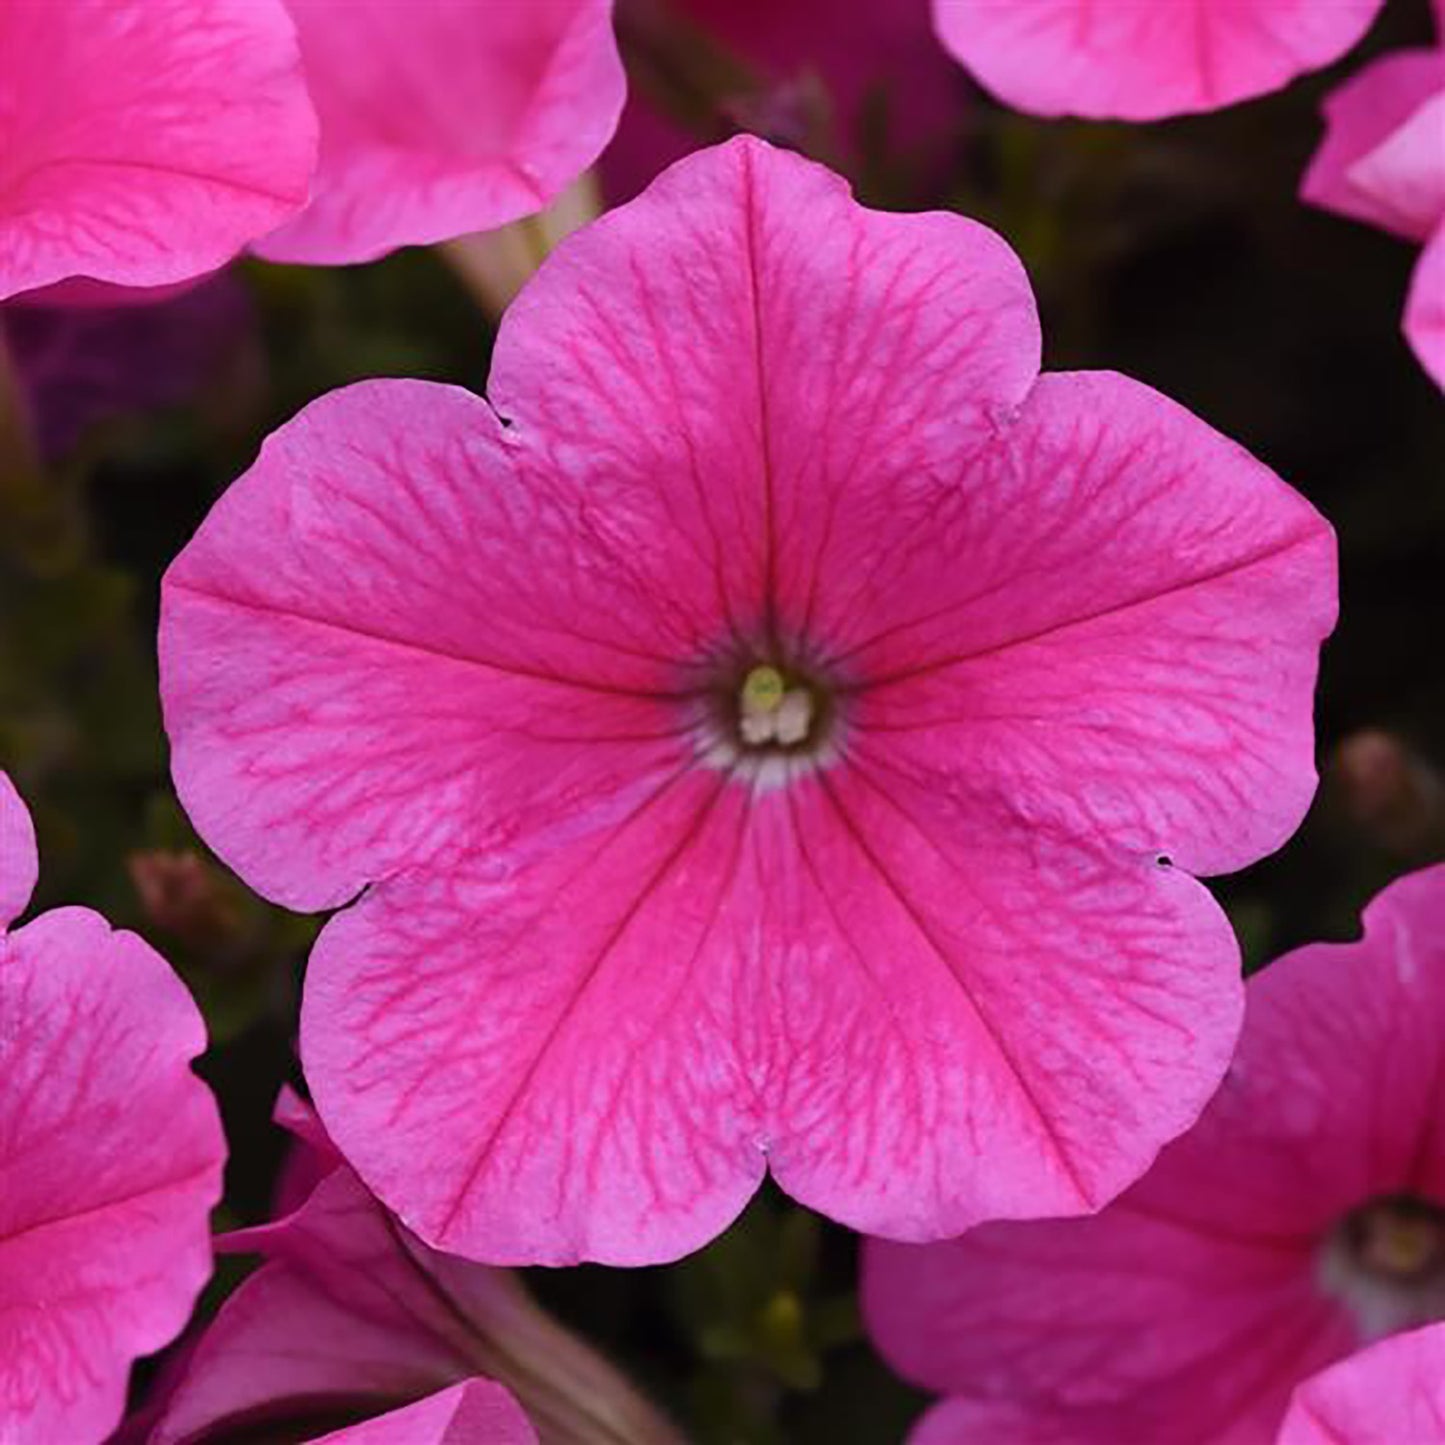 Petunia E3 Easy Wave™ Pink Cosmo Spreading Plantlings Live Baby Plants 1-3in., 6-Pack